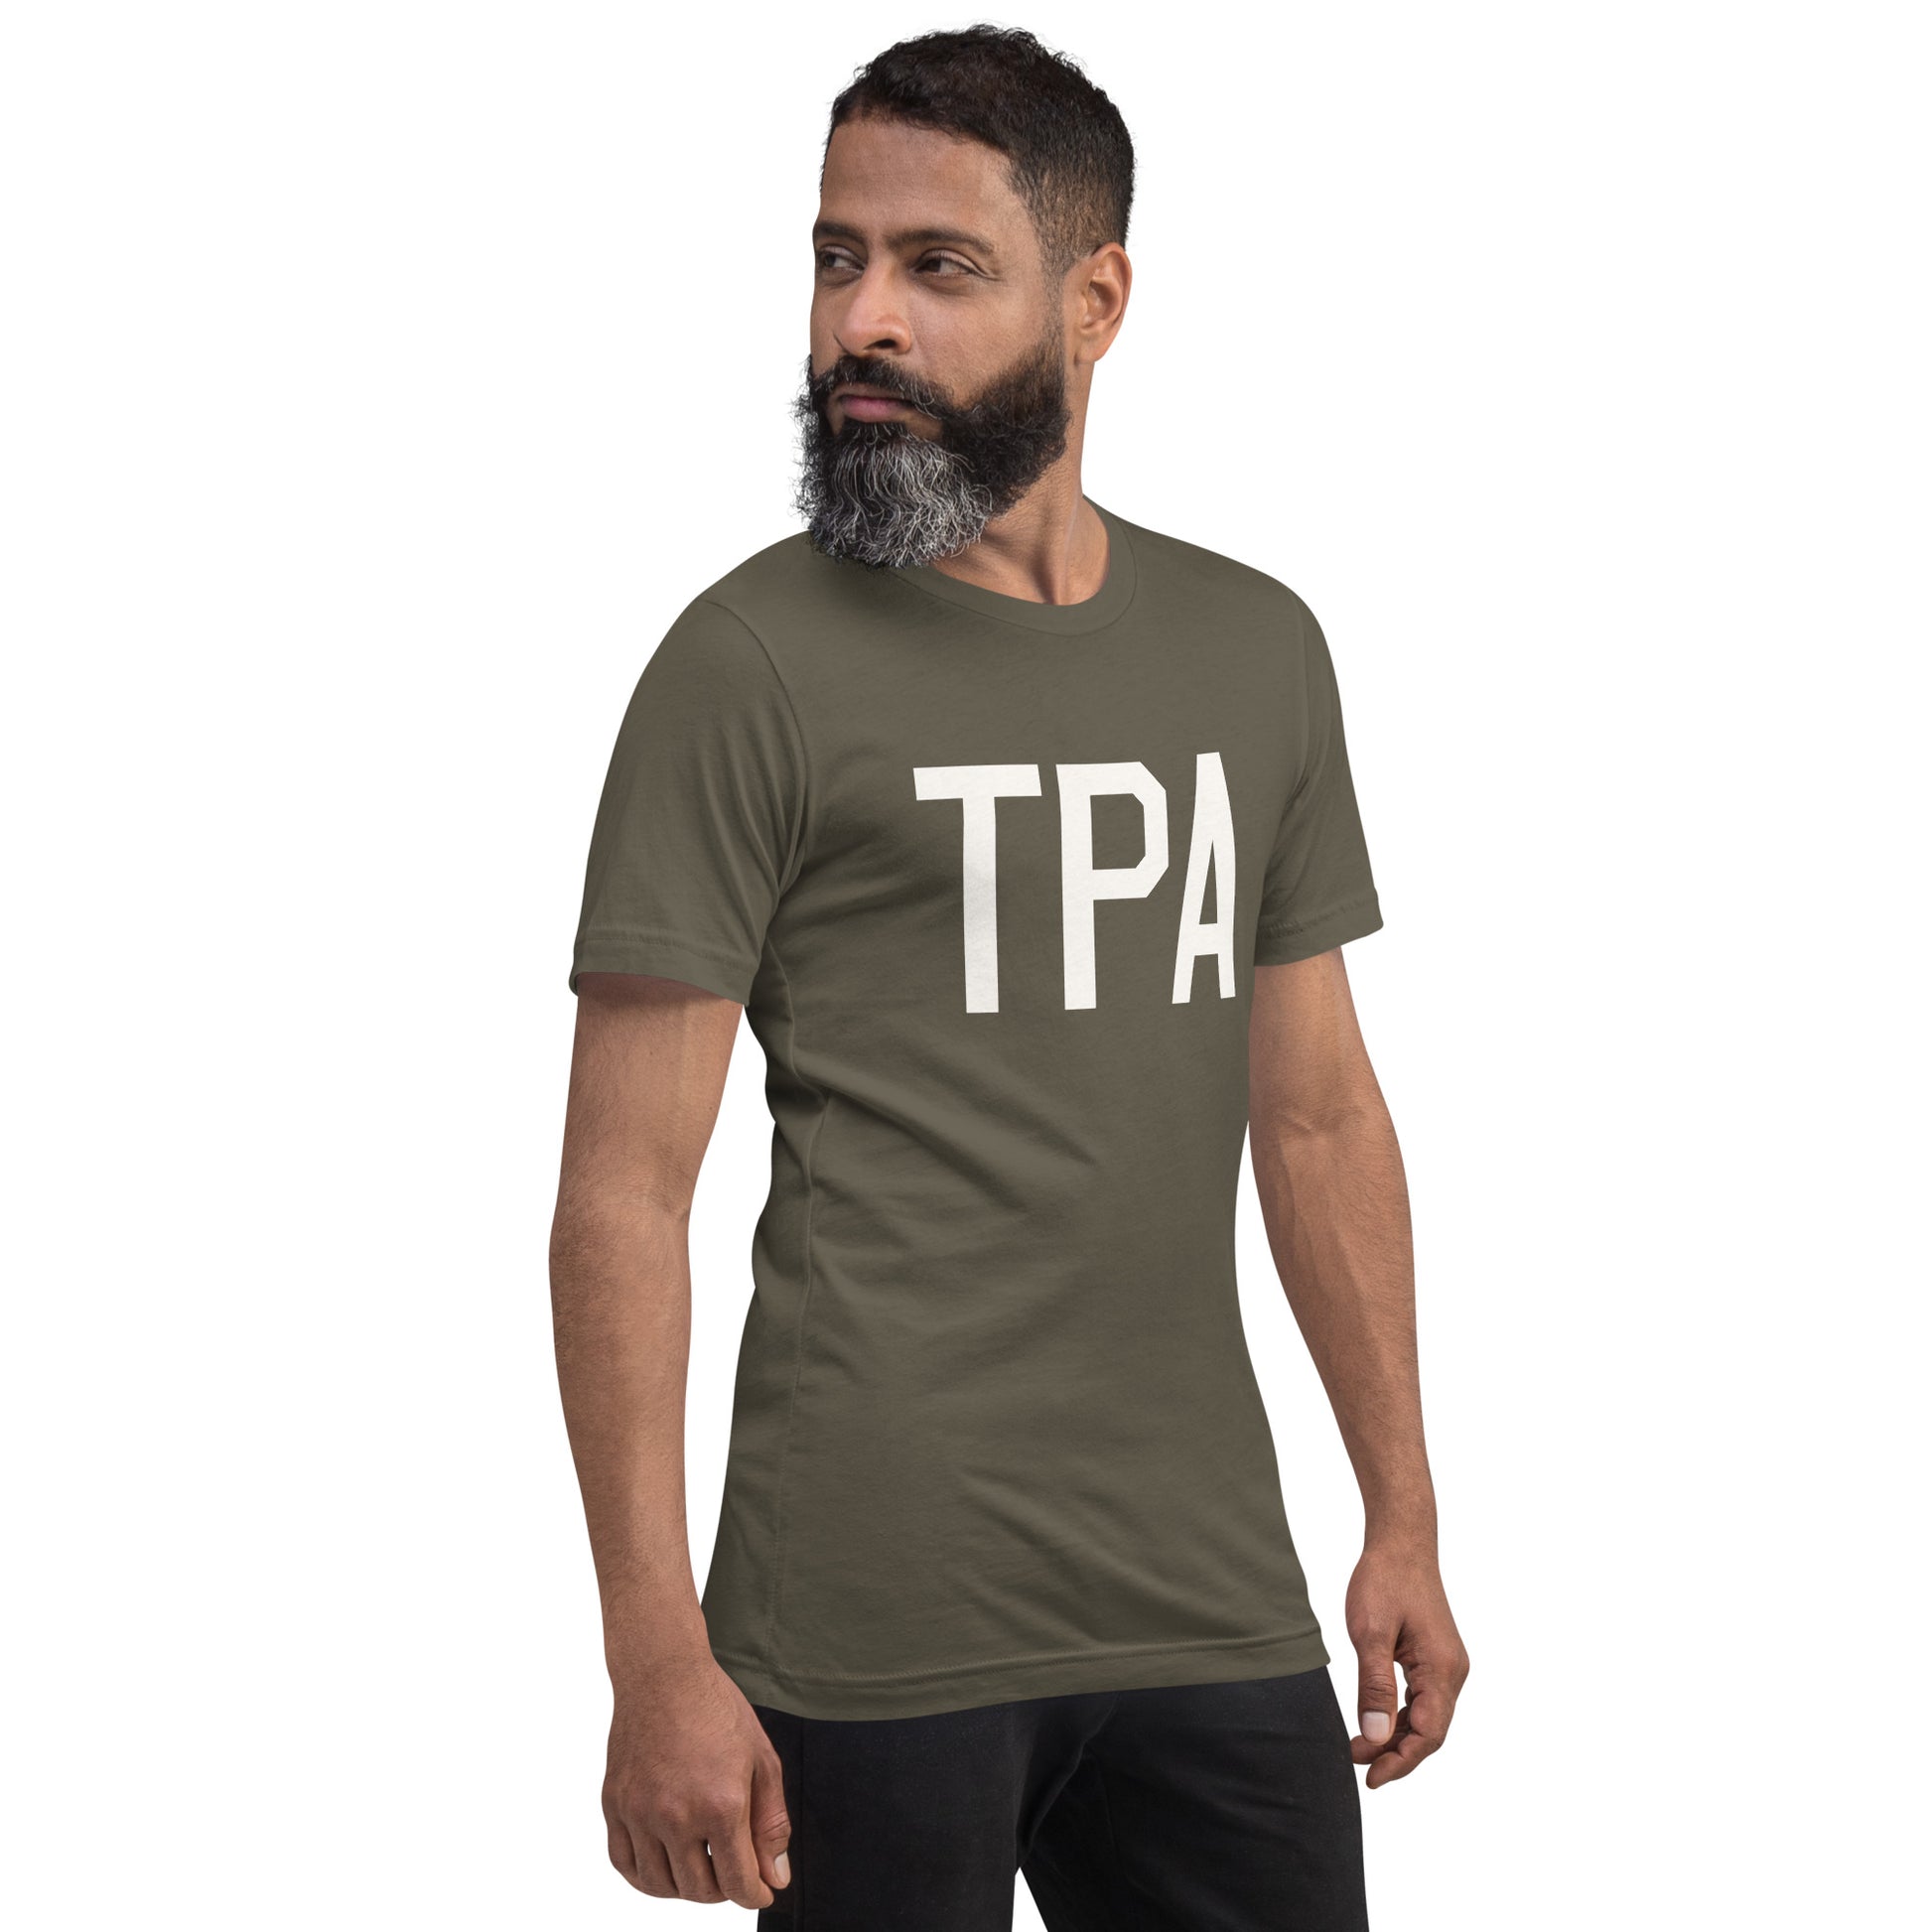 Airport Code T-Shirt - White Graphic • TPA Tampa • YHM Designs - Image 06